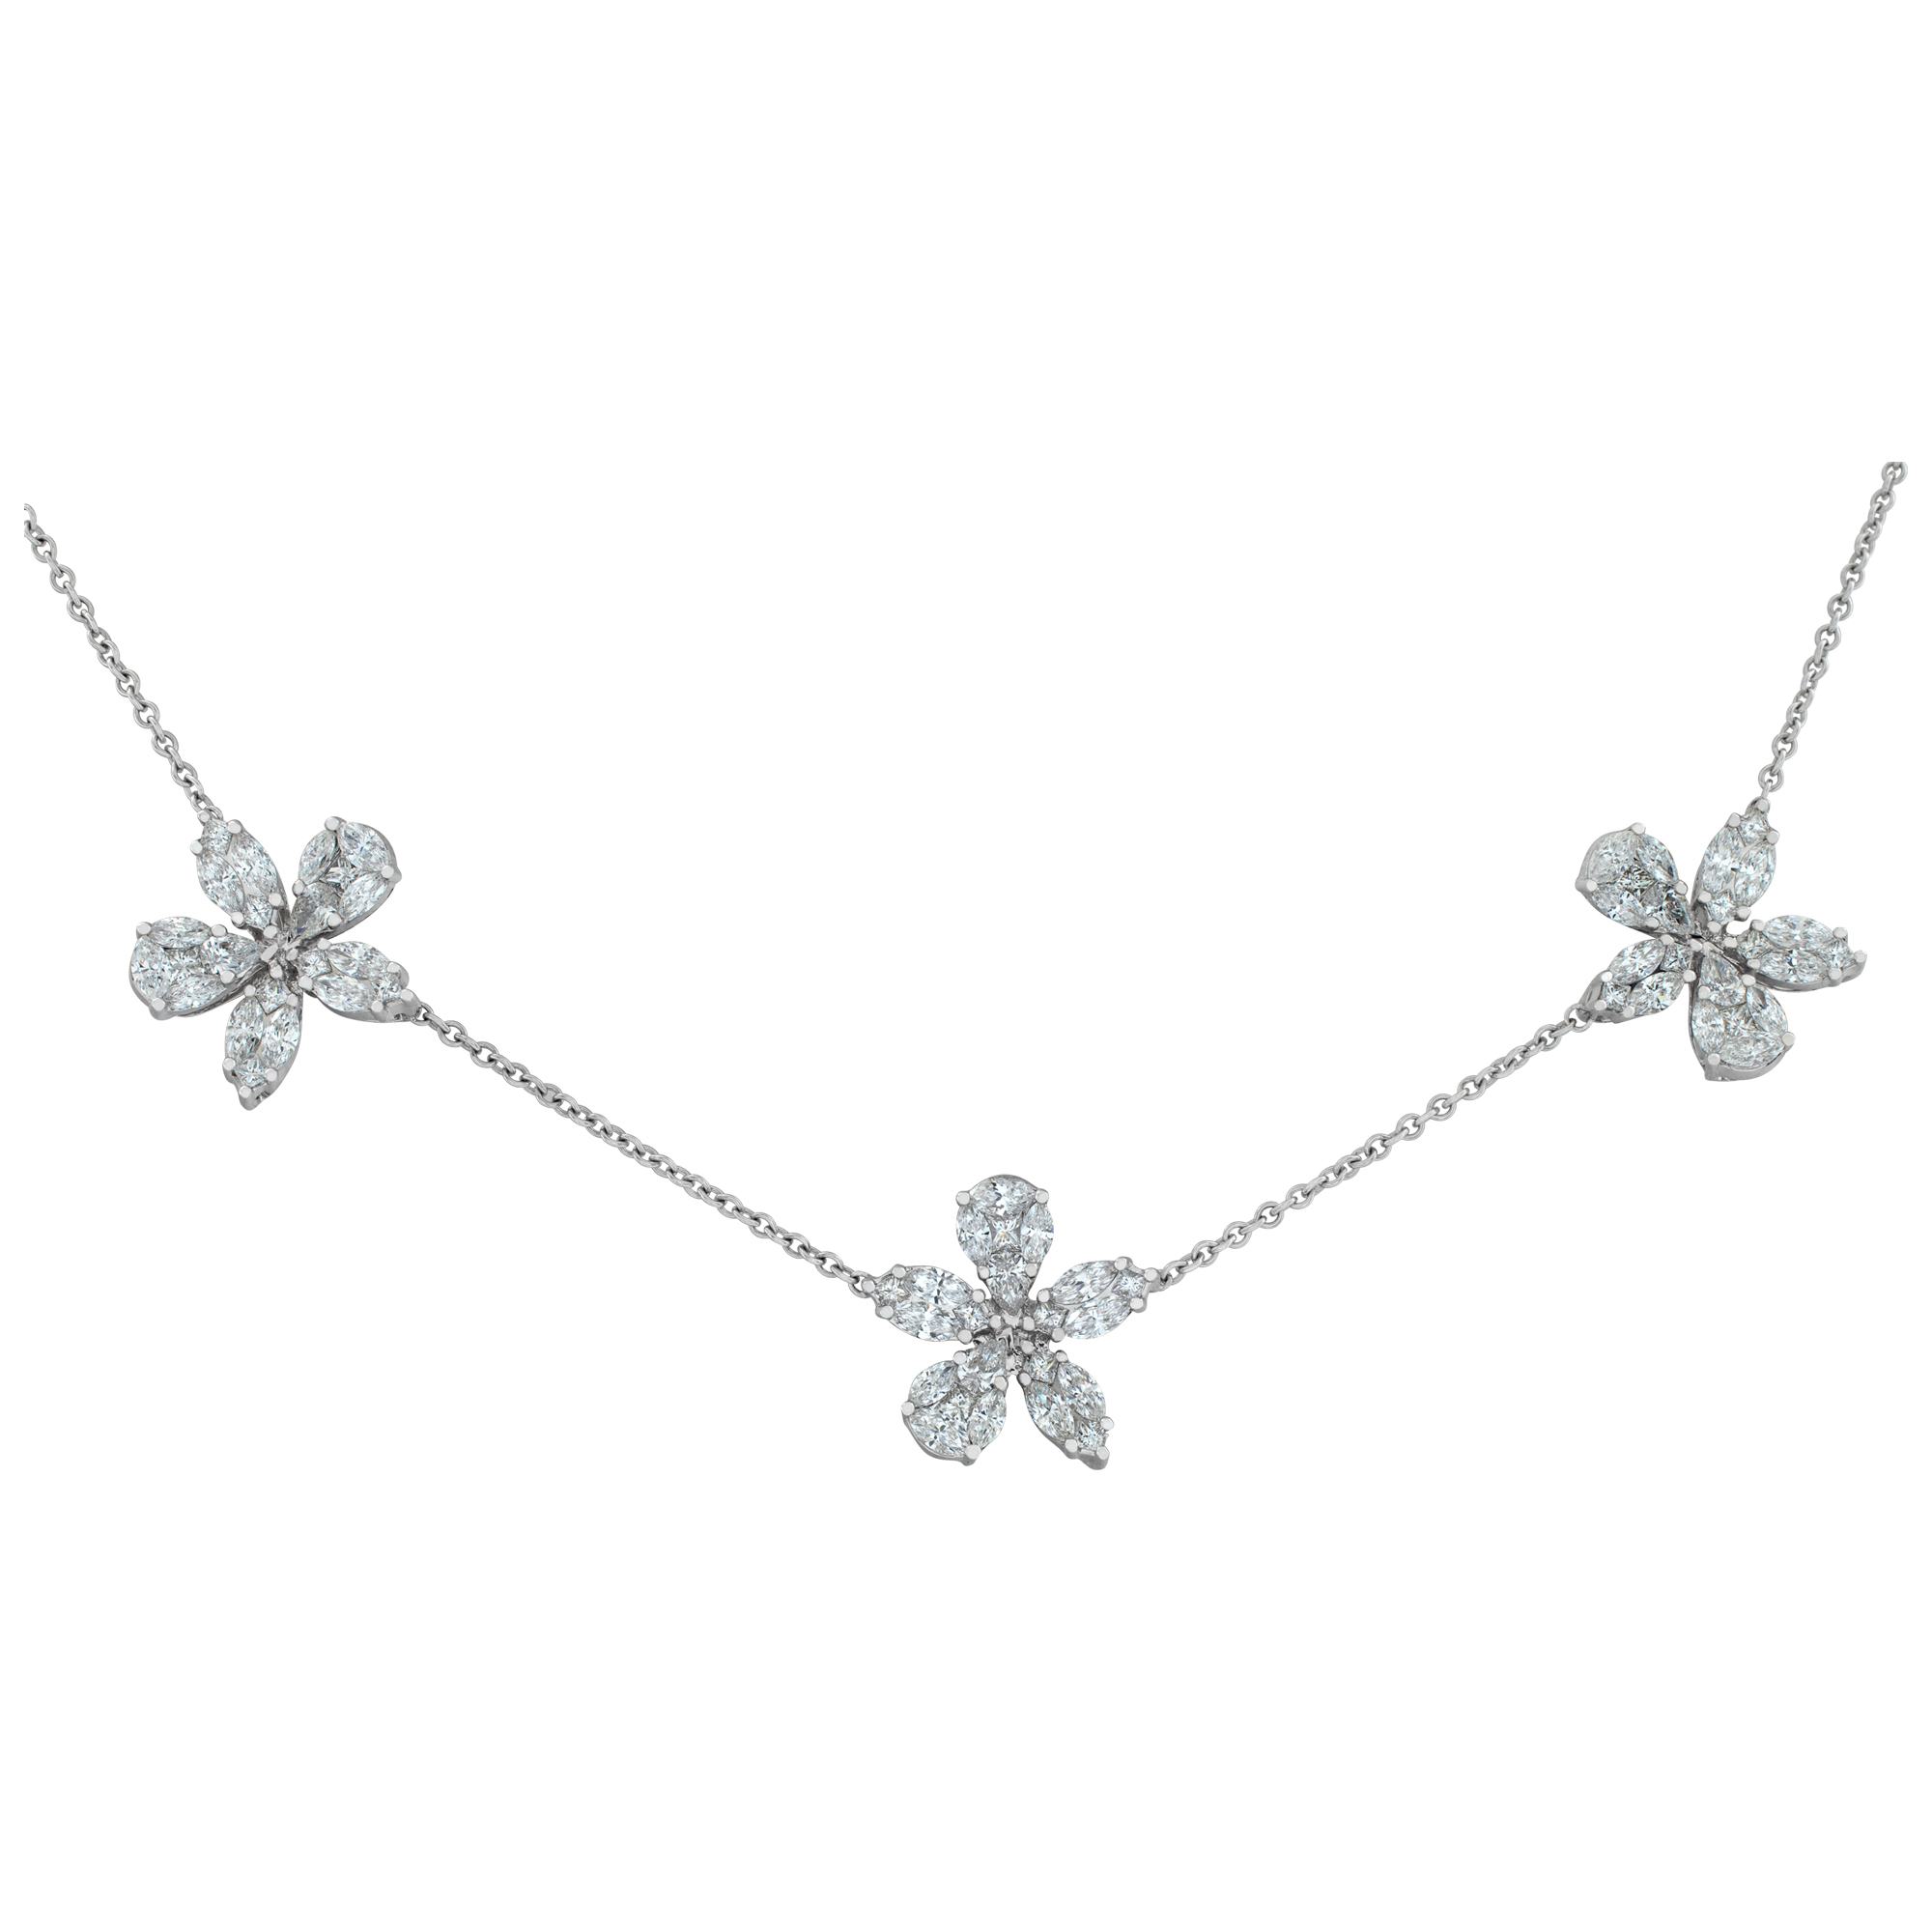 Illusion set diamond flower necklace with 6.00 carats in diamonds. 18k inch length.